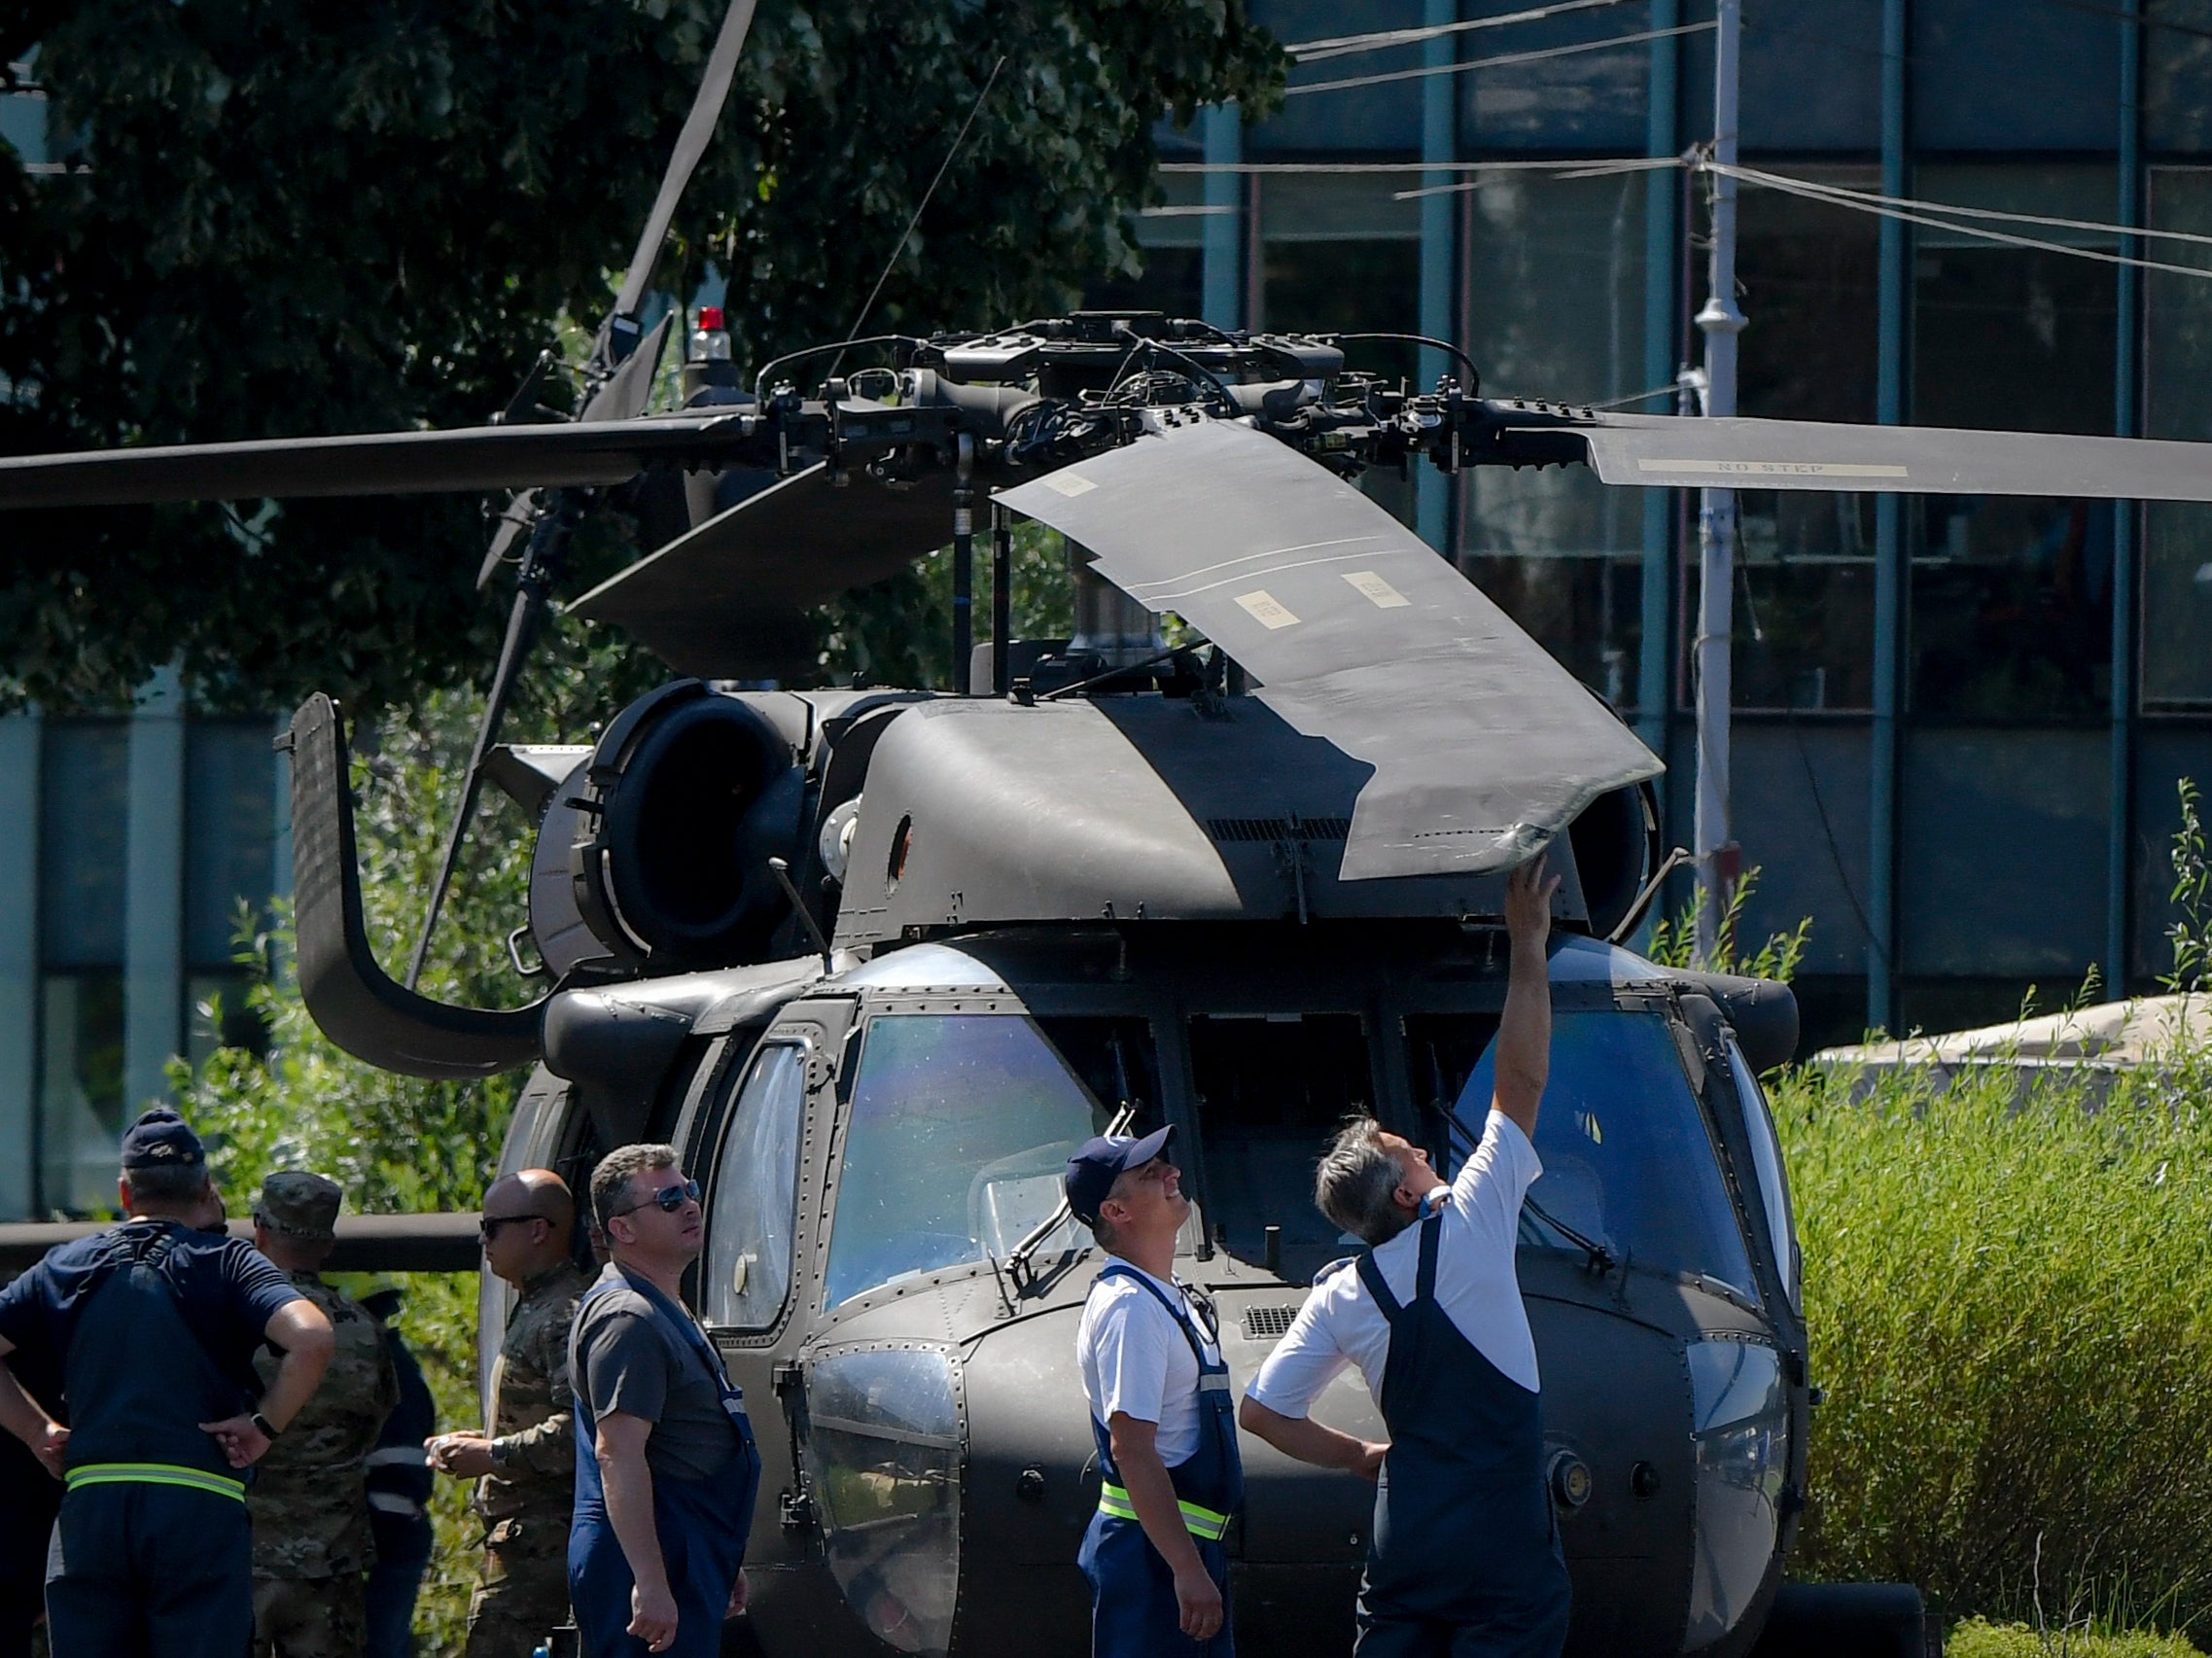 Men inspect the damaged blade of a U.S military Black Hawk helicopter following an emergency landing on a busy boulevard, in Bucharest, Romania, Thursday, July 15, 2021.